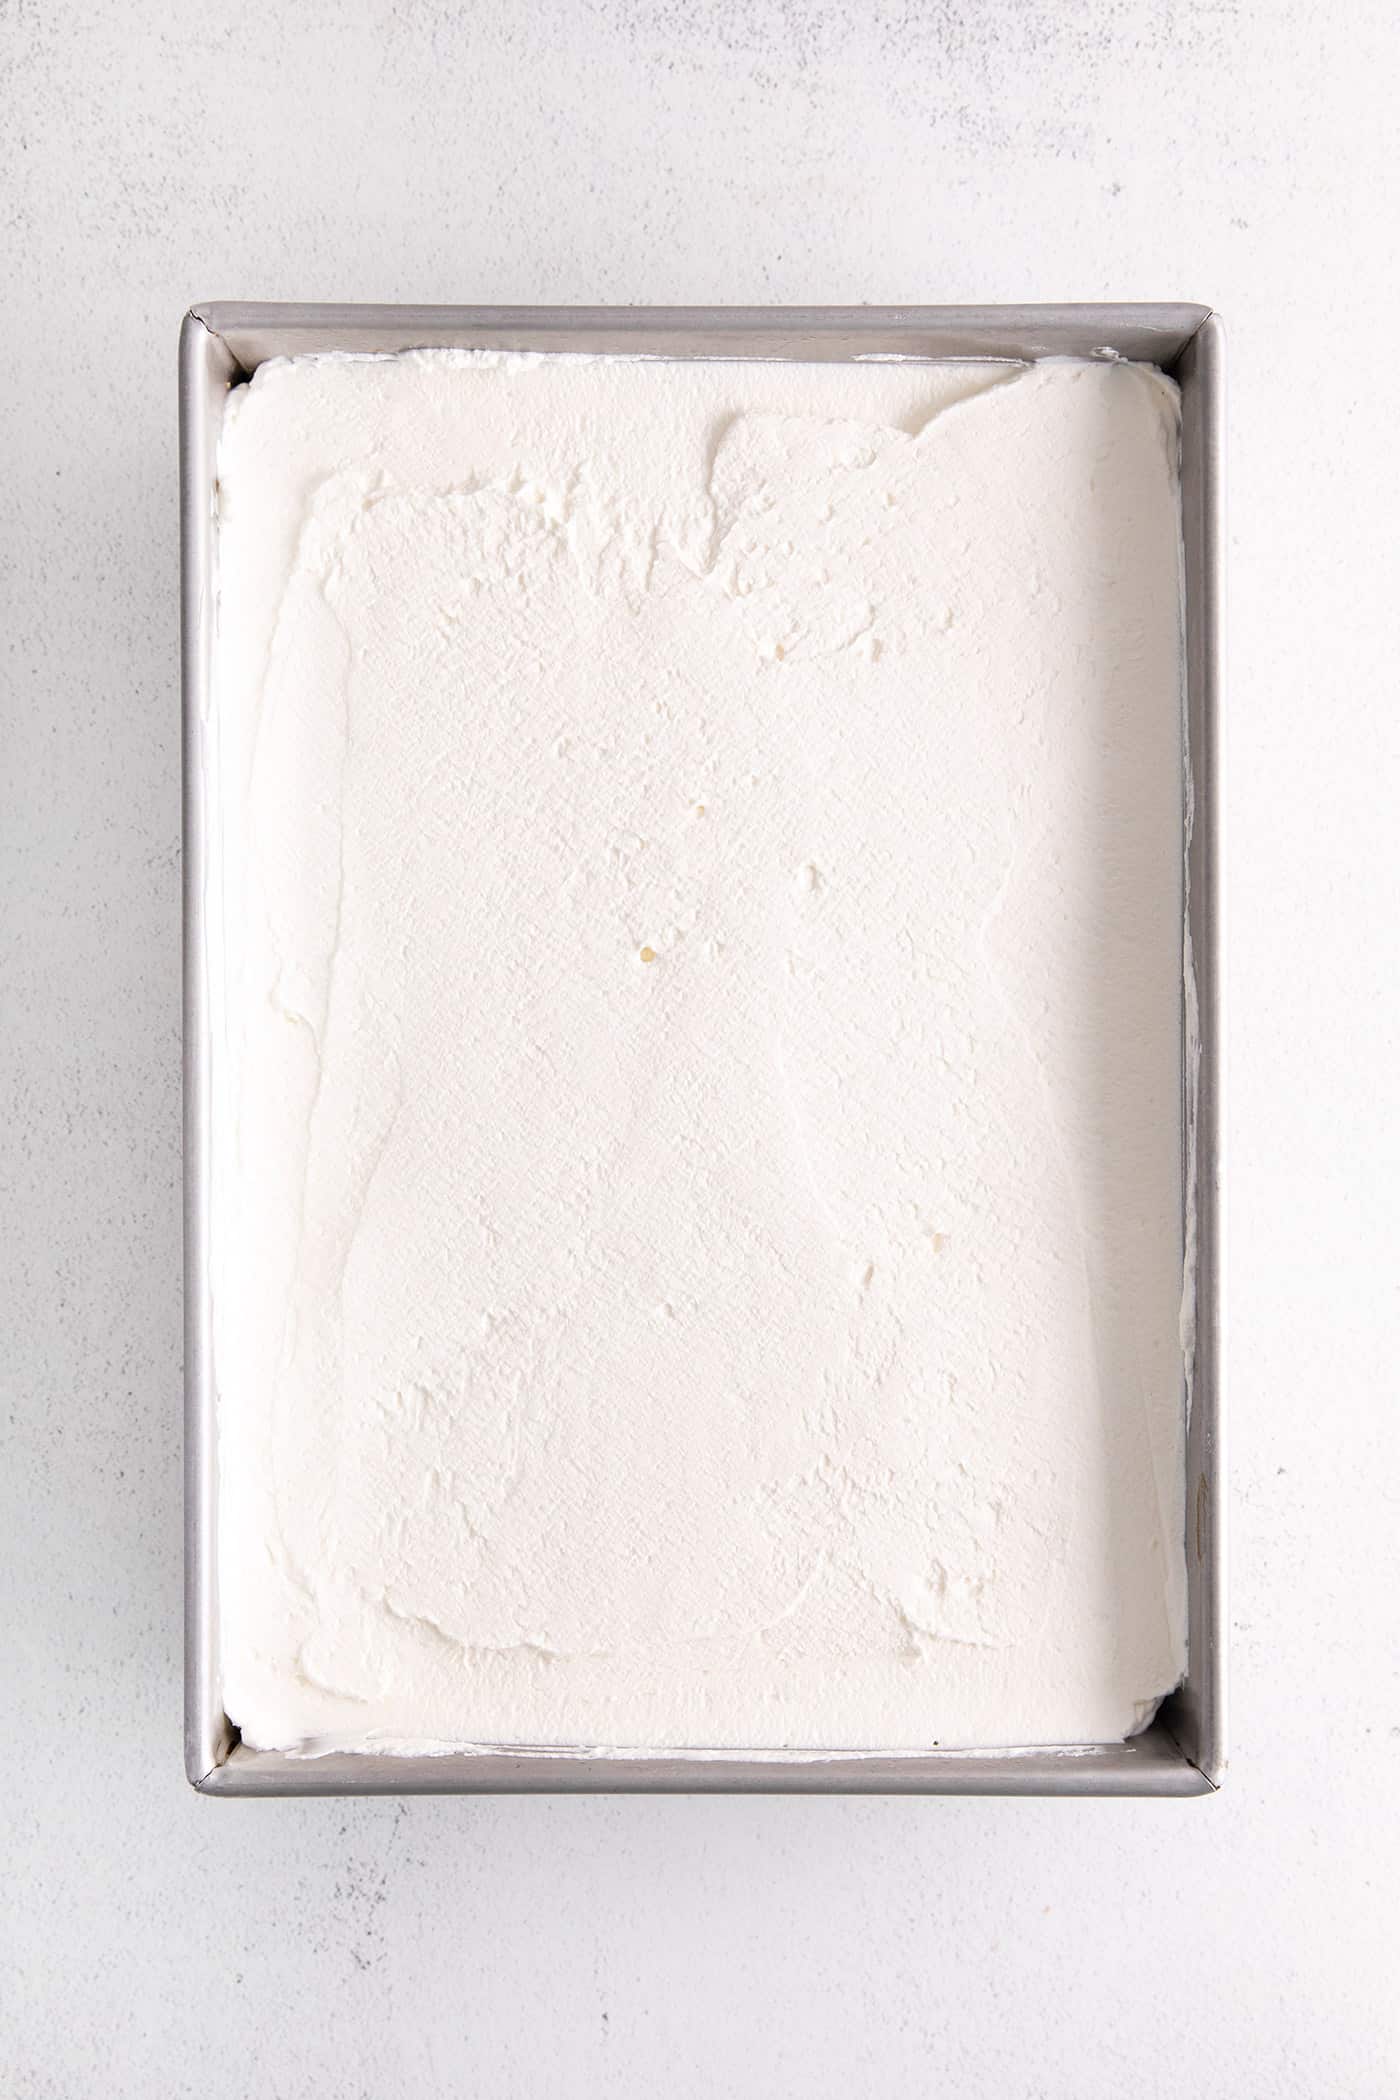 Whipped cream spread over cake